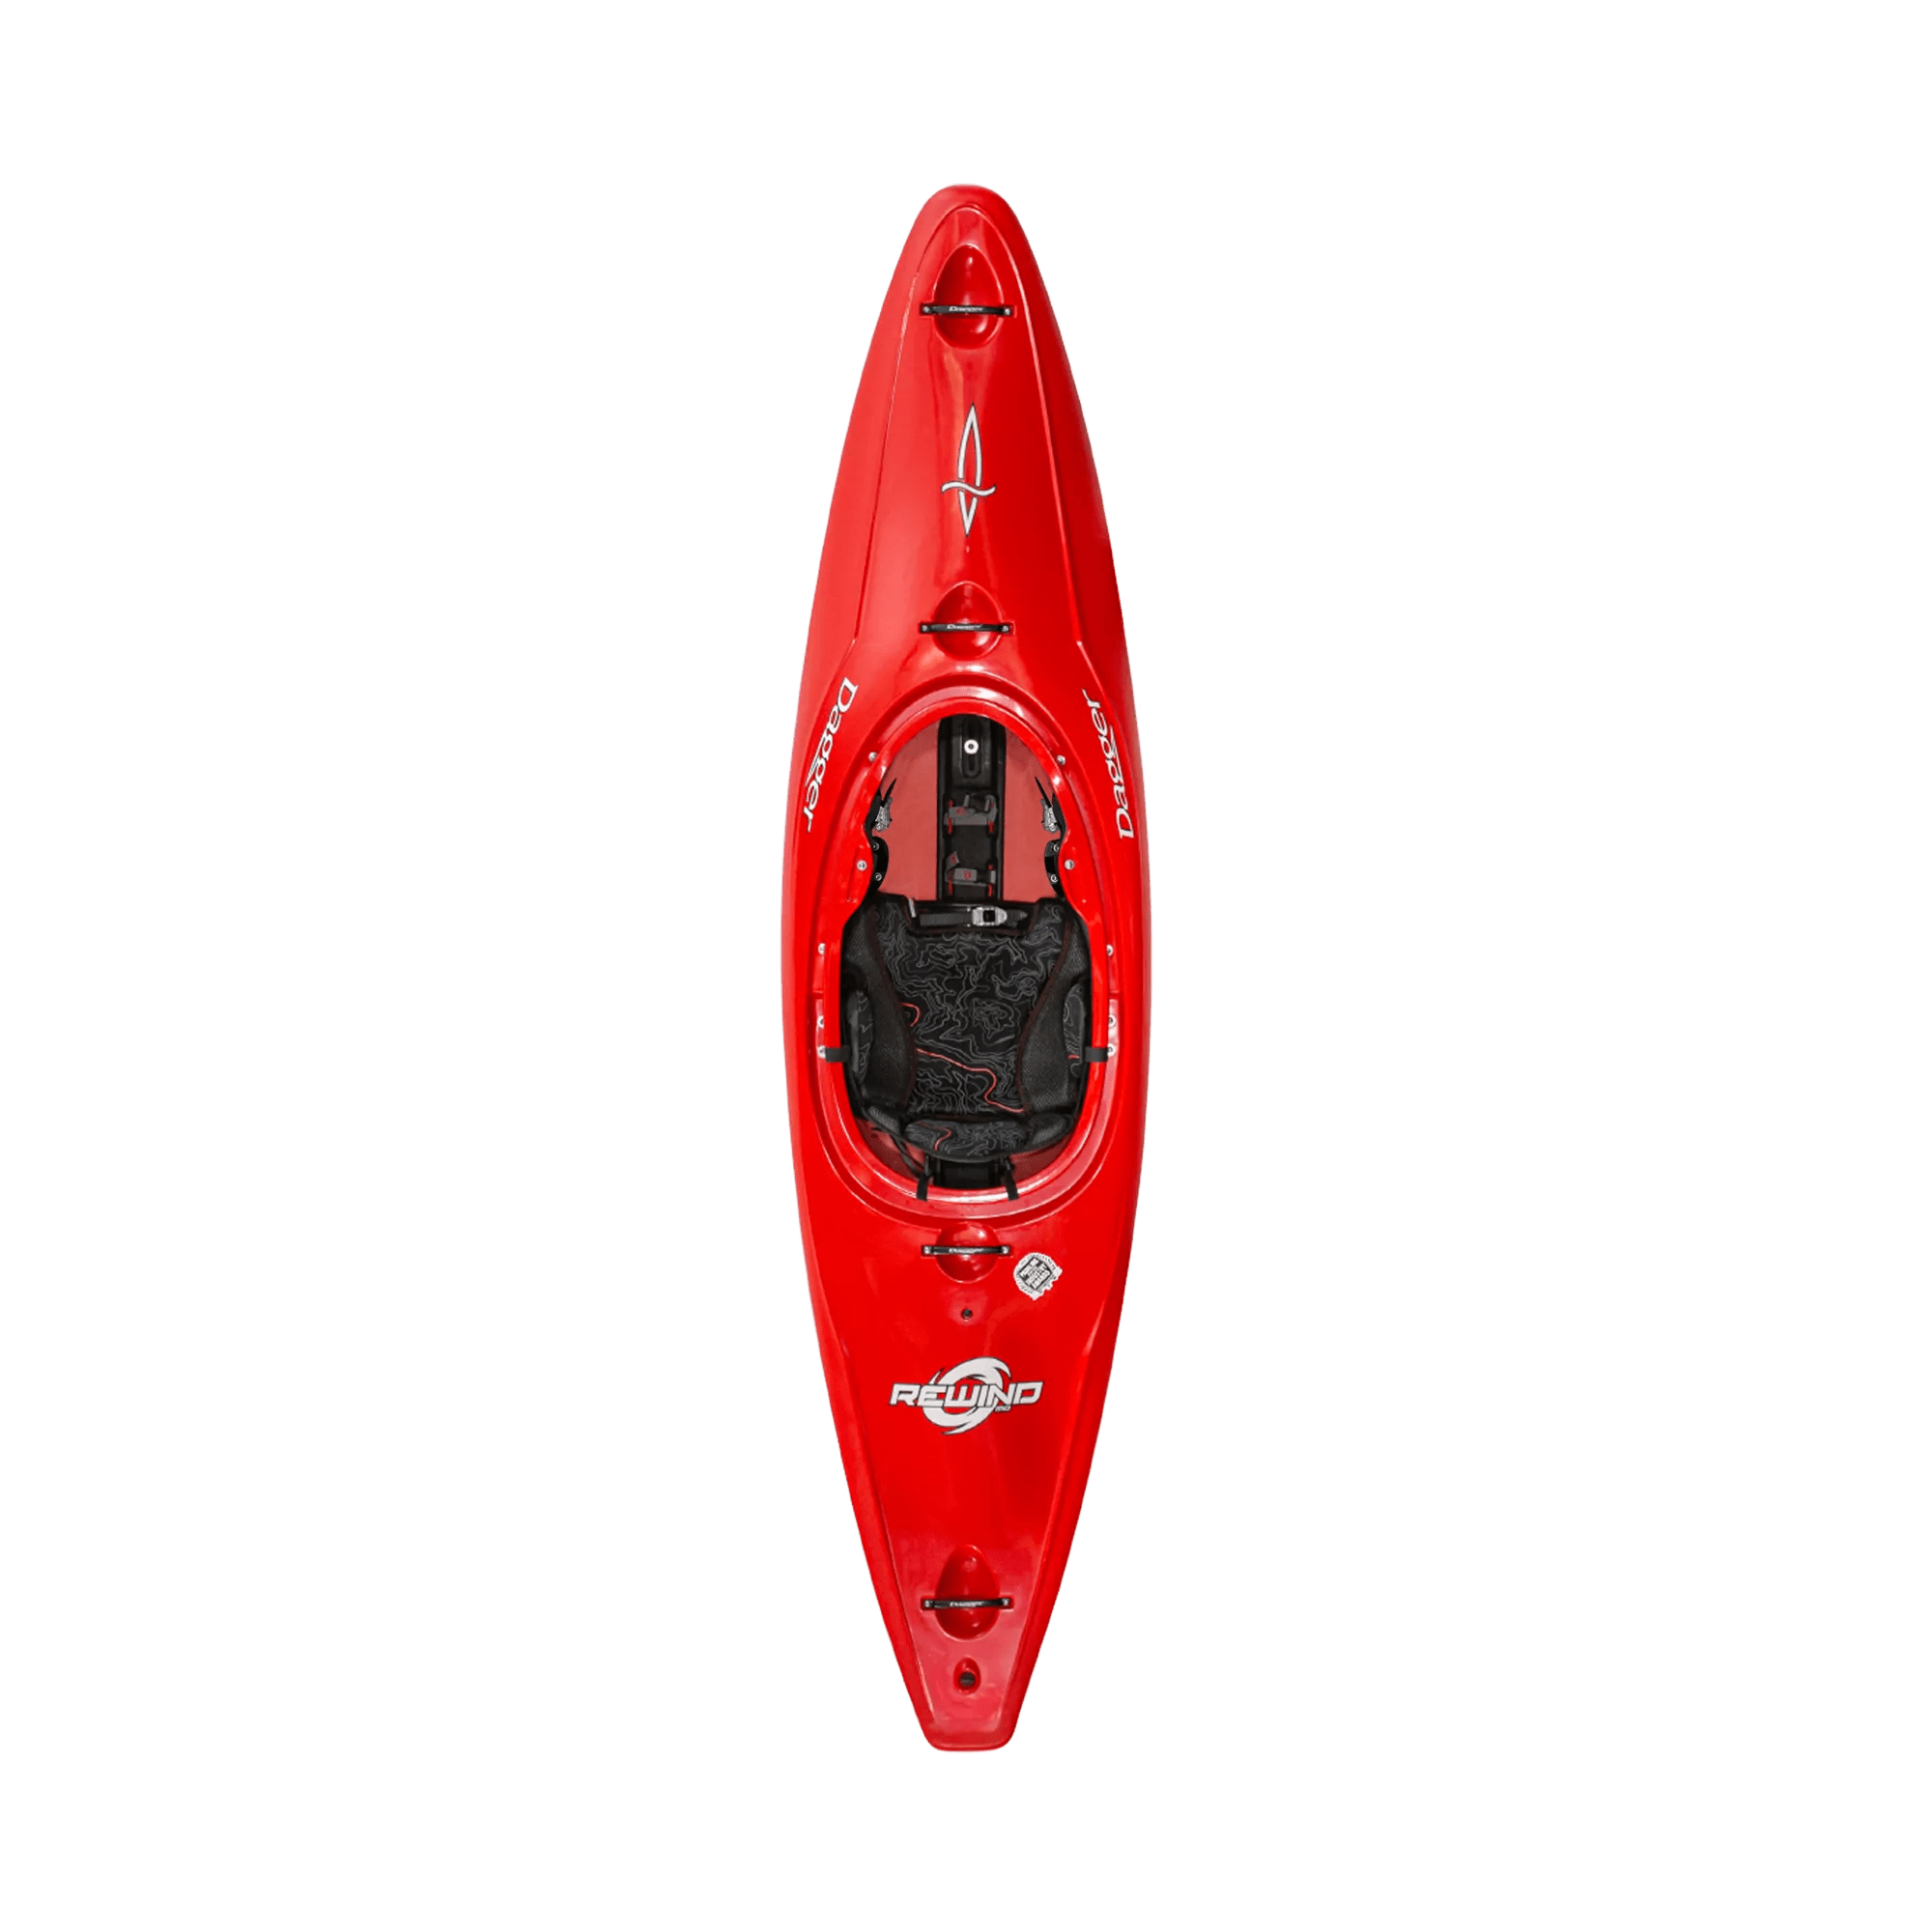 DAGGER - Rewind L River Play Whitewater Kayak - Red - 9010480057 - TOP